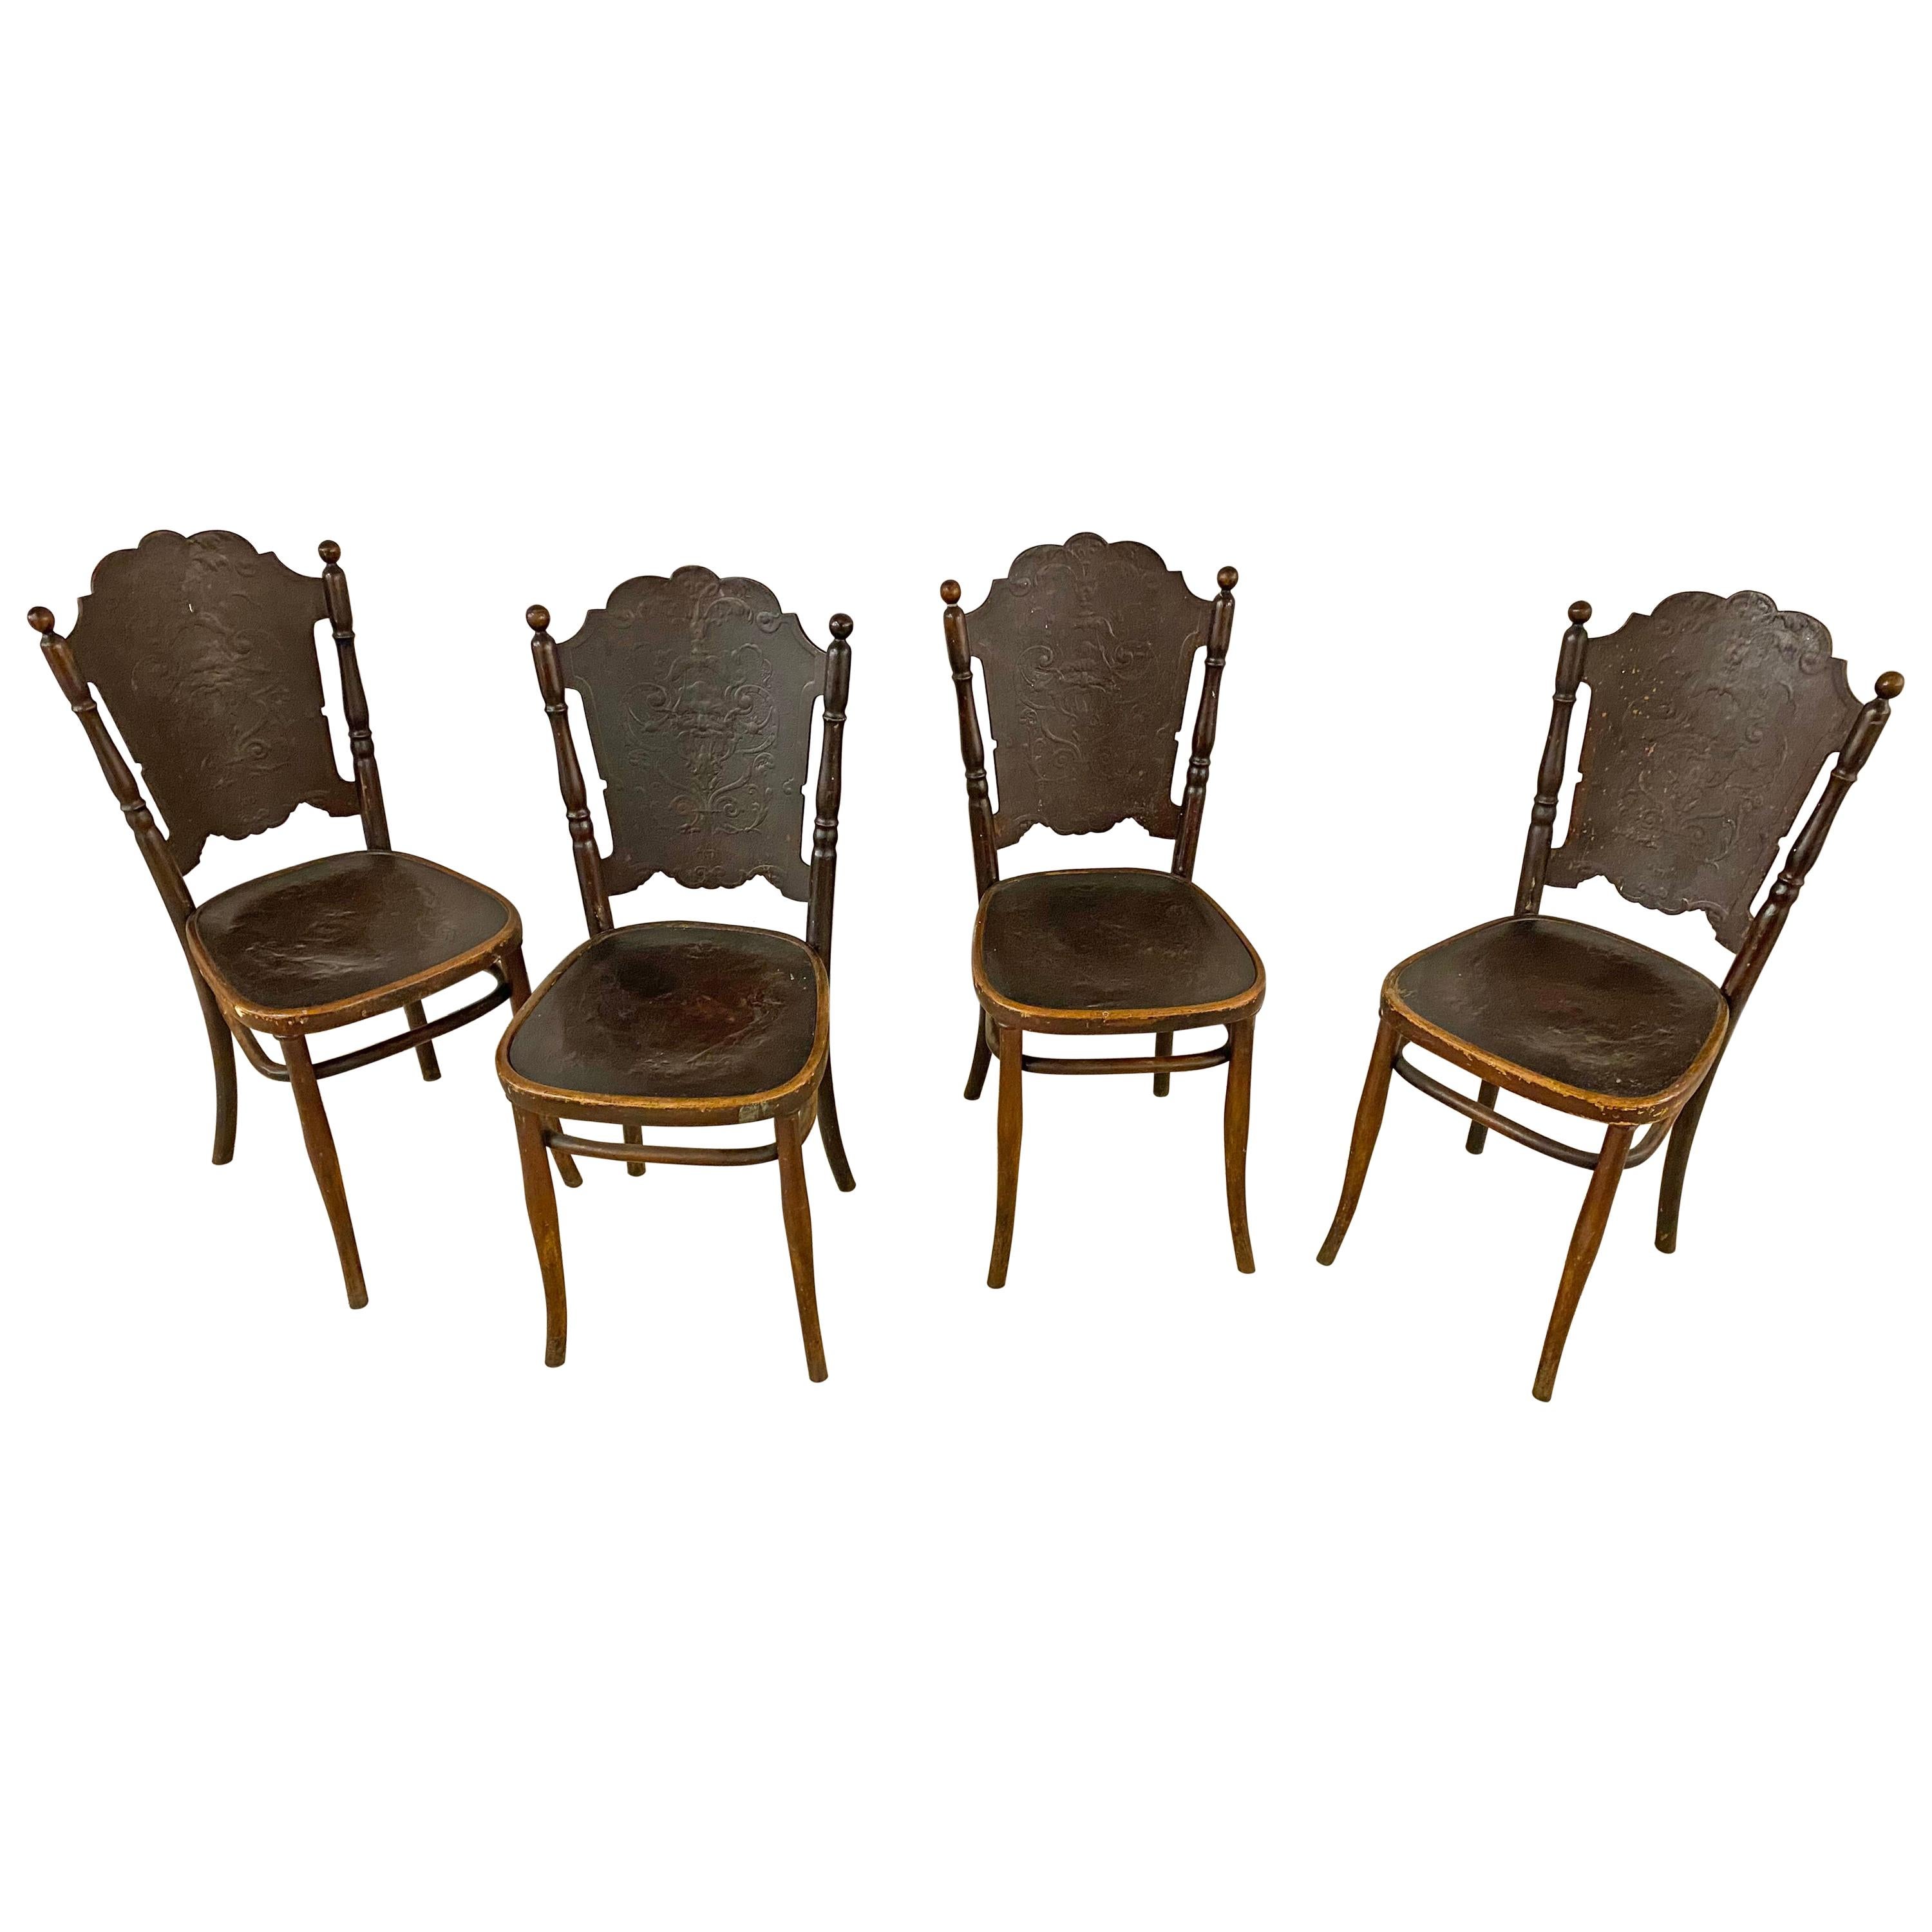 4 Antique N ° 67 Chairs from Jacob & Josef Kohn, circa 1900 For Sale